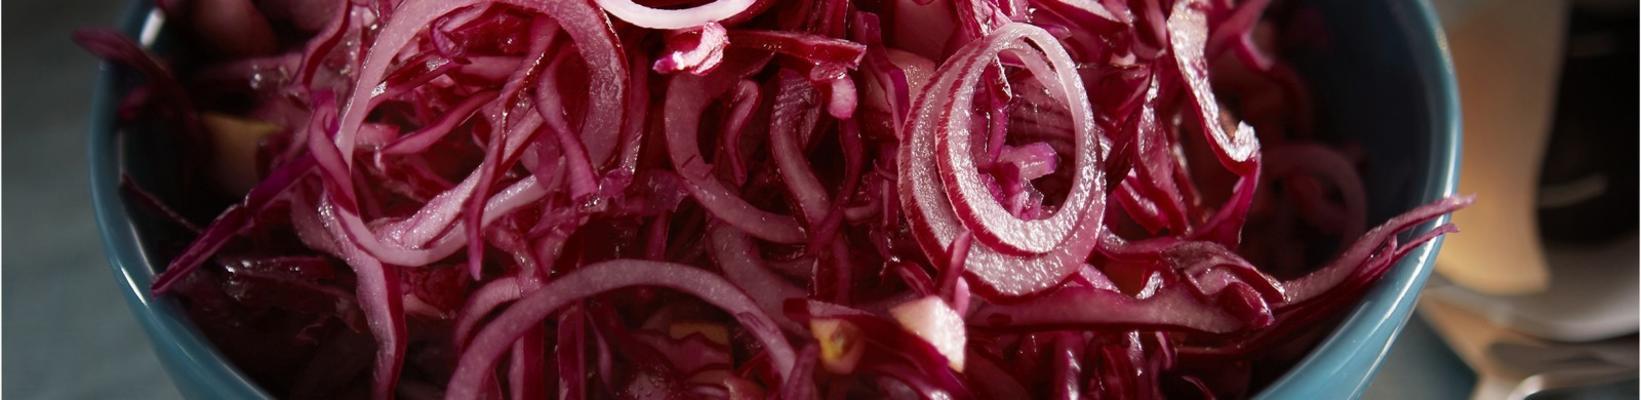 red cabbage salad with mint